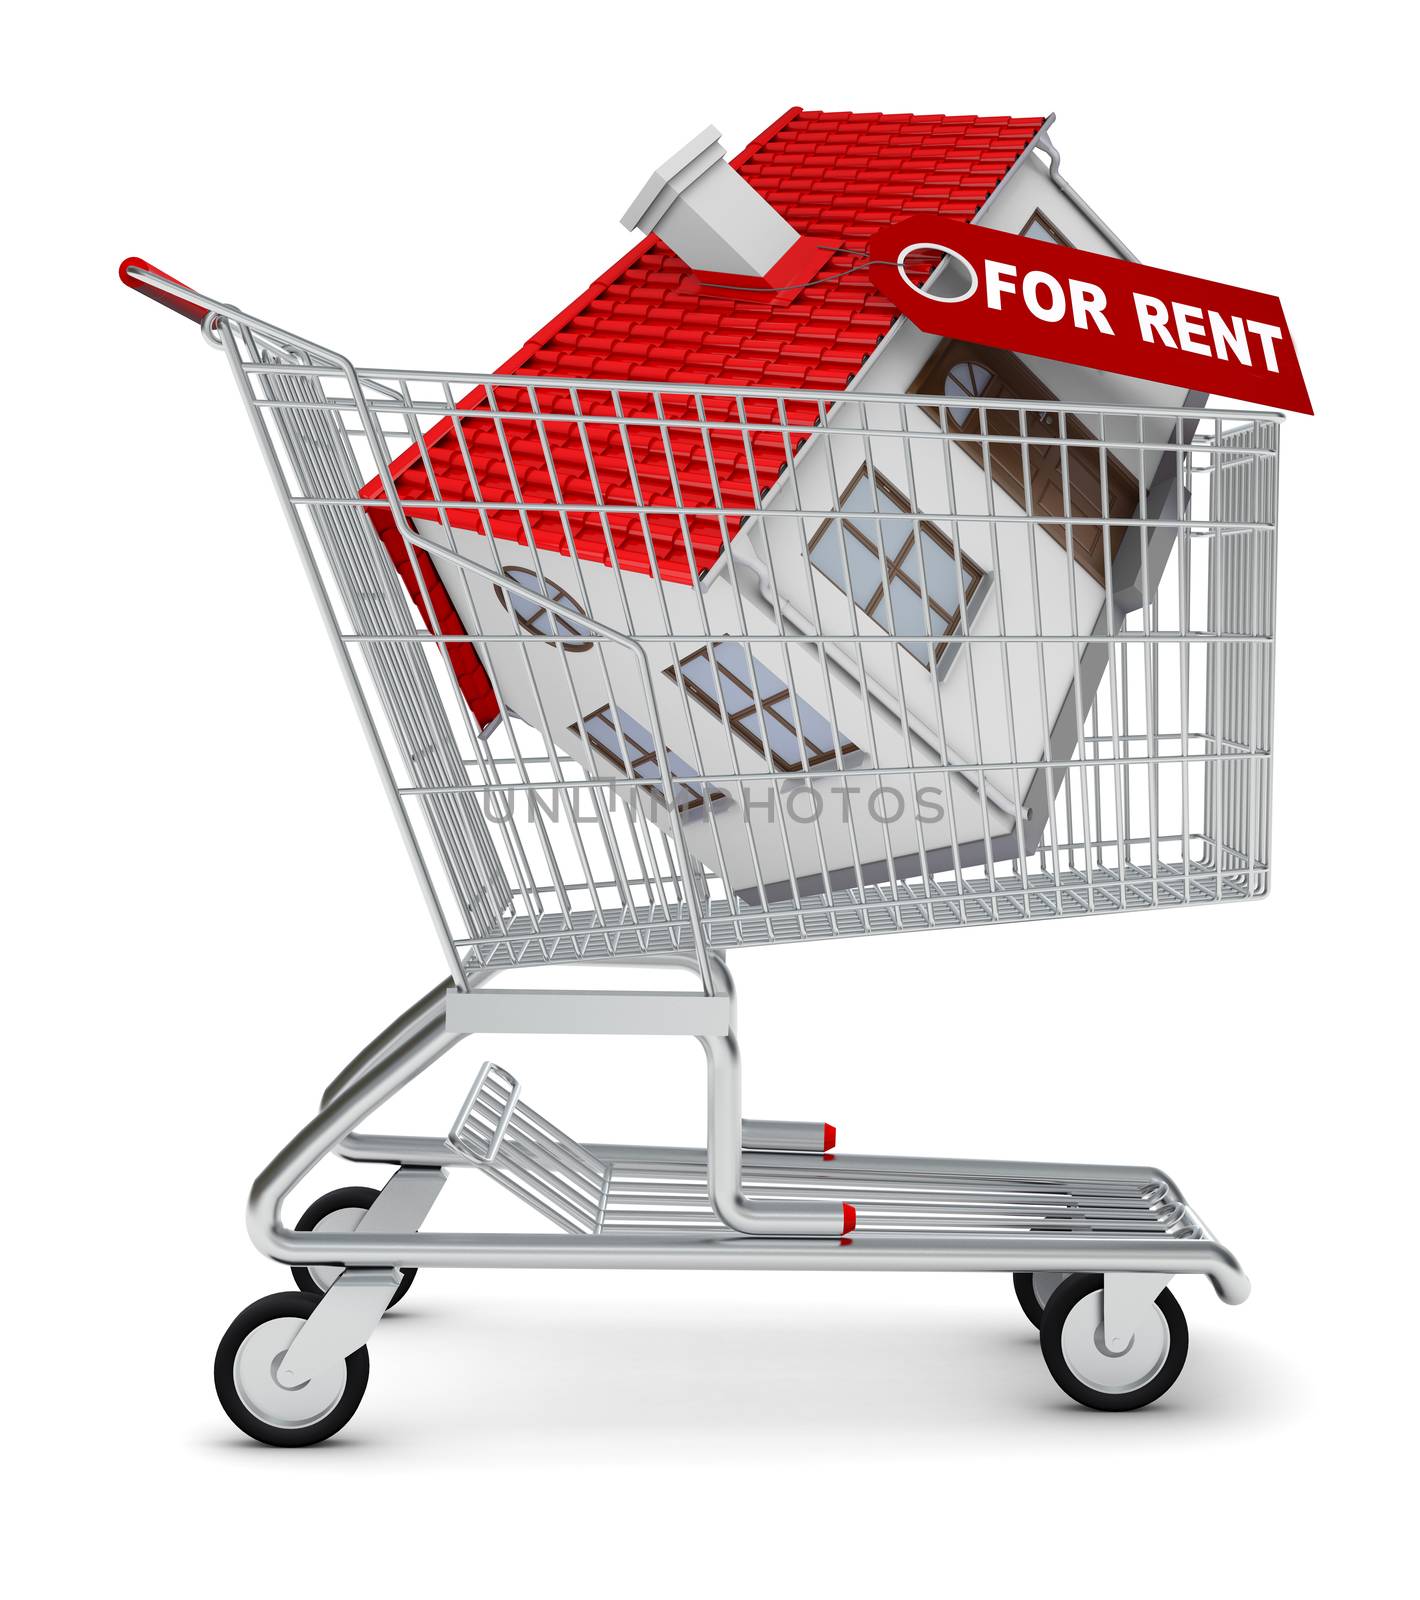 House for rent in shopping cart on isolated white background